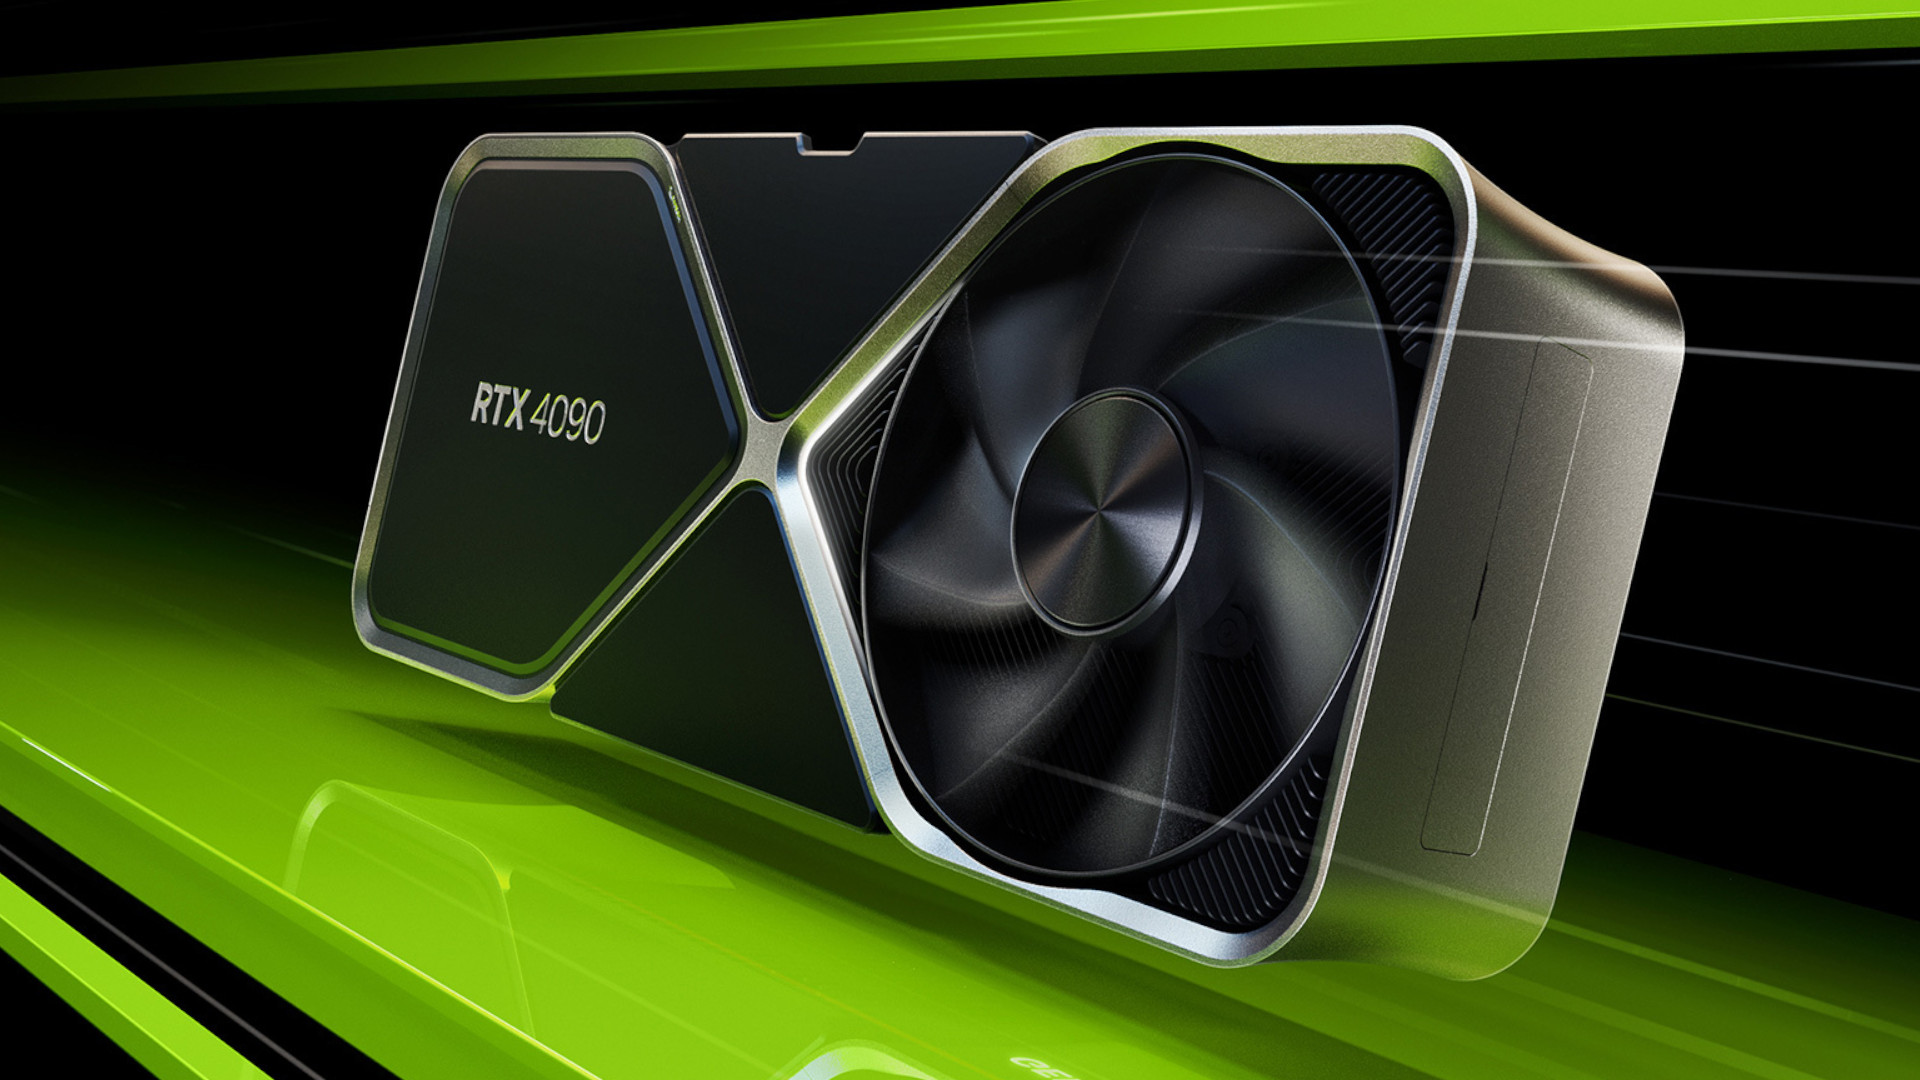 Nvidia GeForce RTX 4090 graphics card on a black background with green stripes